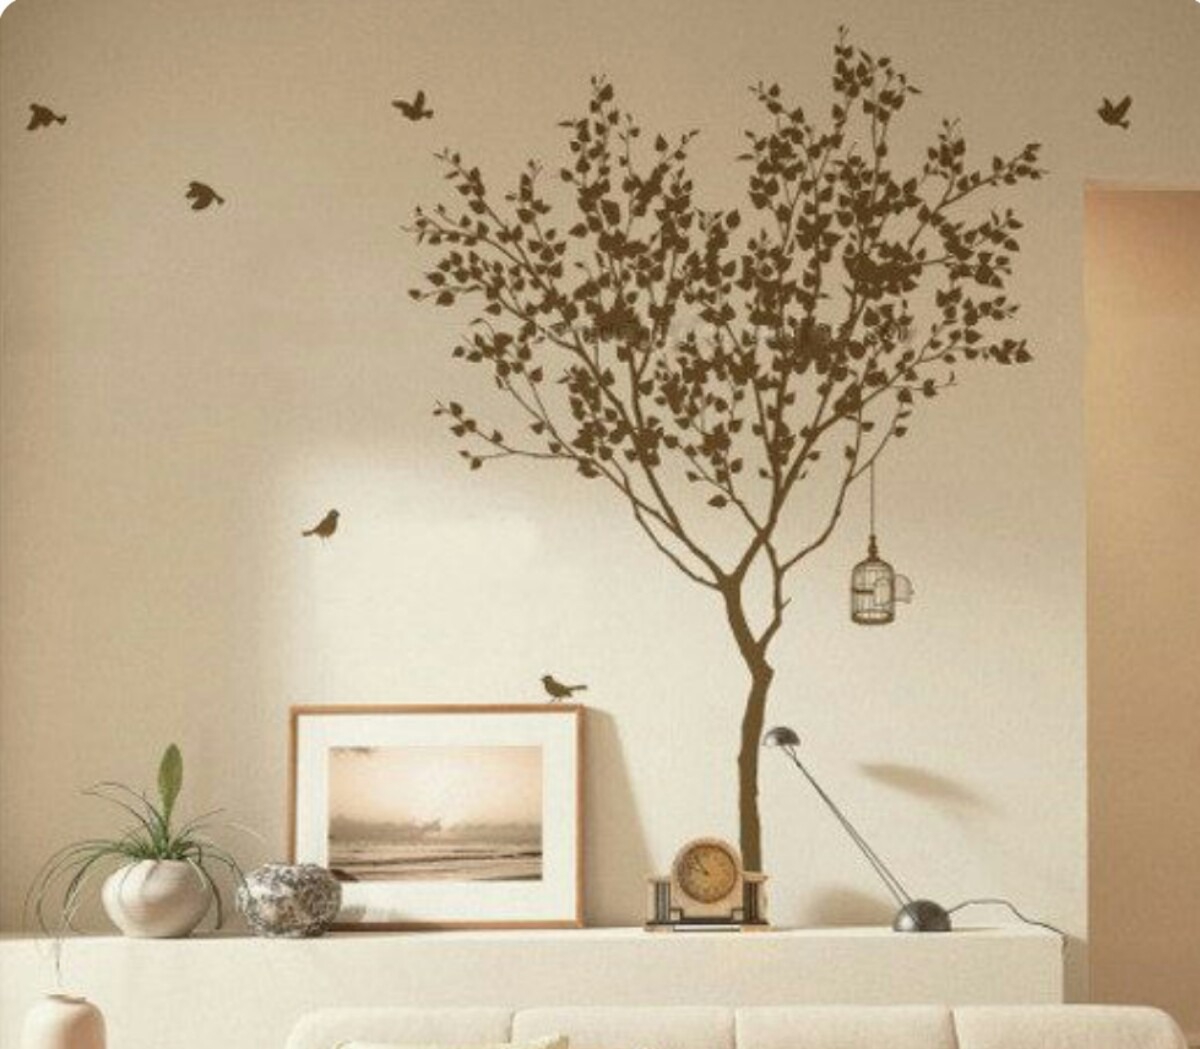 Wall Art Tree T2 ONE COLOR Vinyl Decor Decal Sticker Mural Decoration T2B 